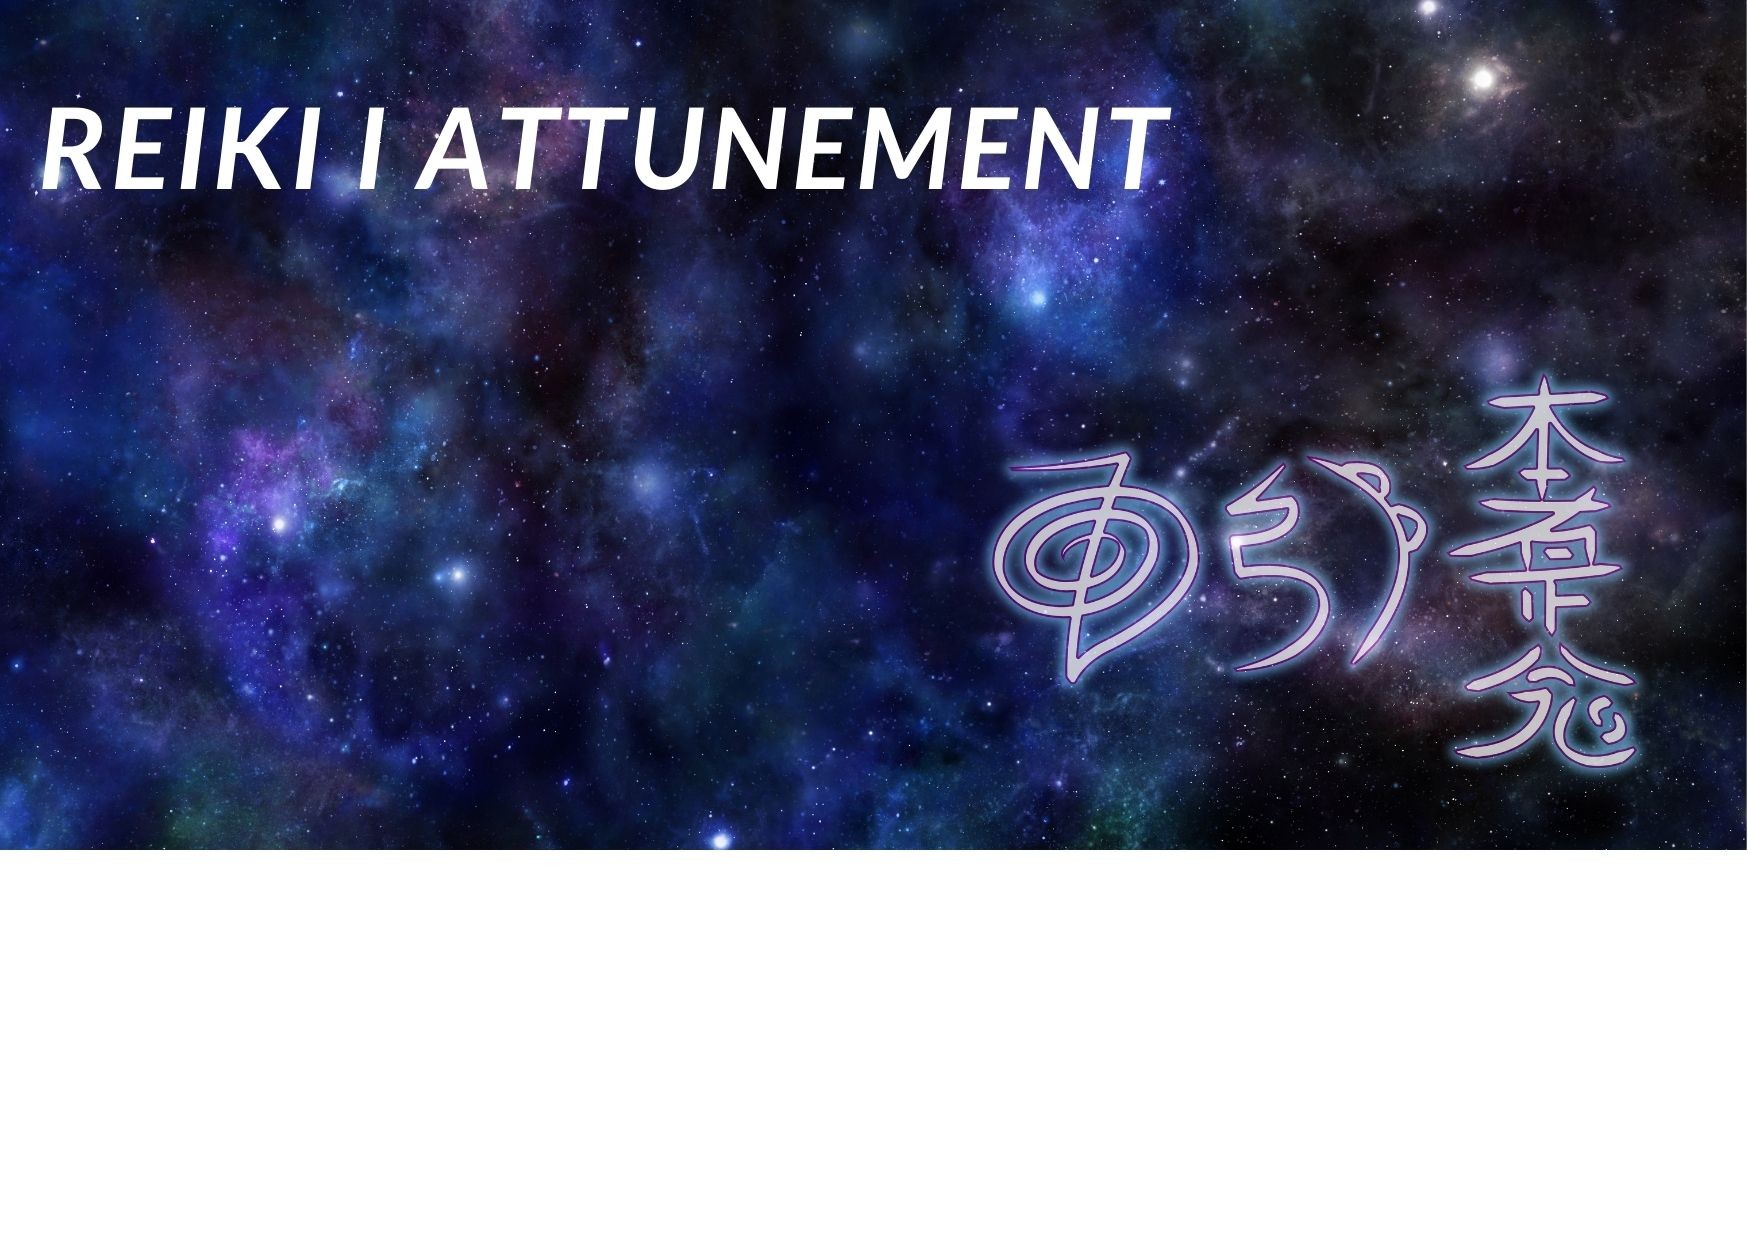 Reiki I Attunement - How To Do It